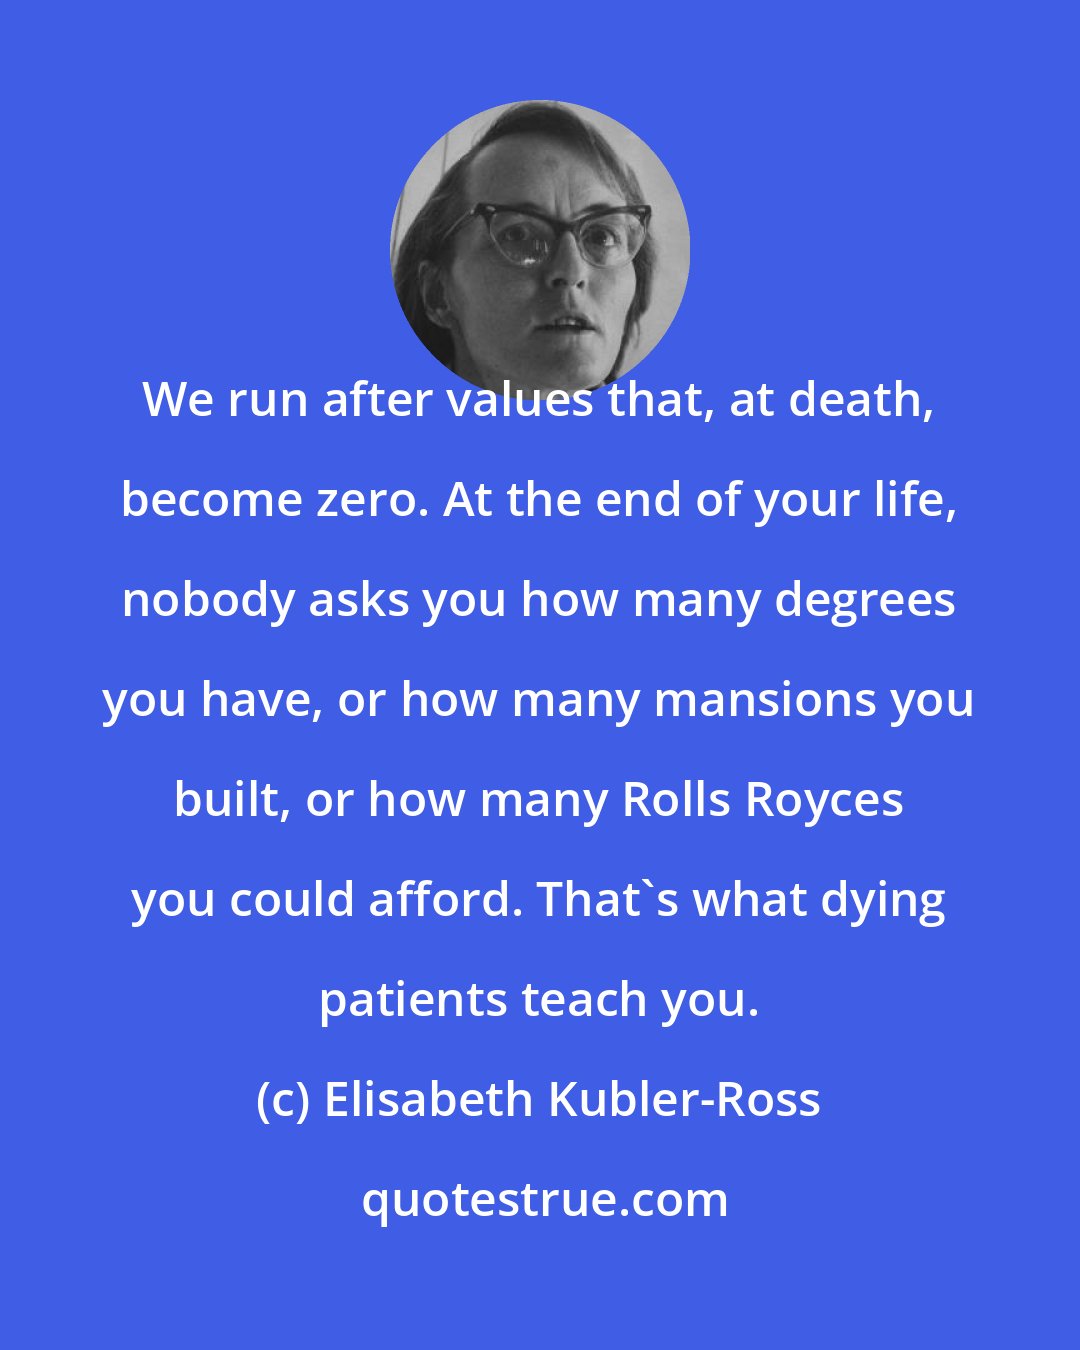 Elisabeth Kubler-Ross: We run after values that, at death, become zero. At the end of your life, nobody asks you how many degrees you have, or how many mansions you built, or how many Rolls Royces you could afford. That's what dying patients teach you.